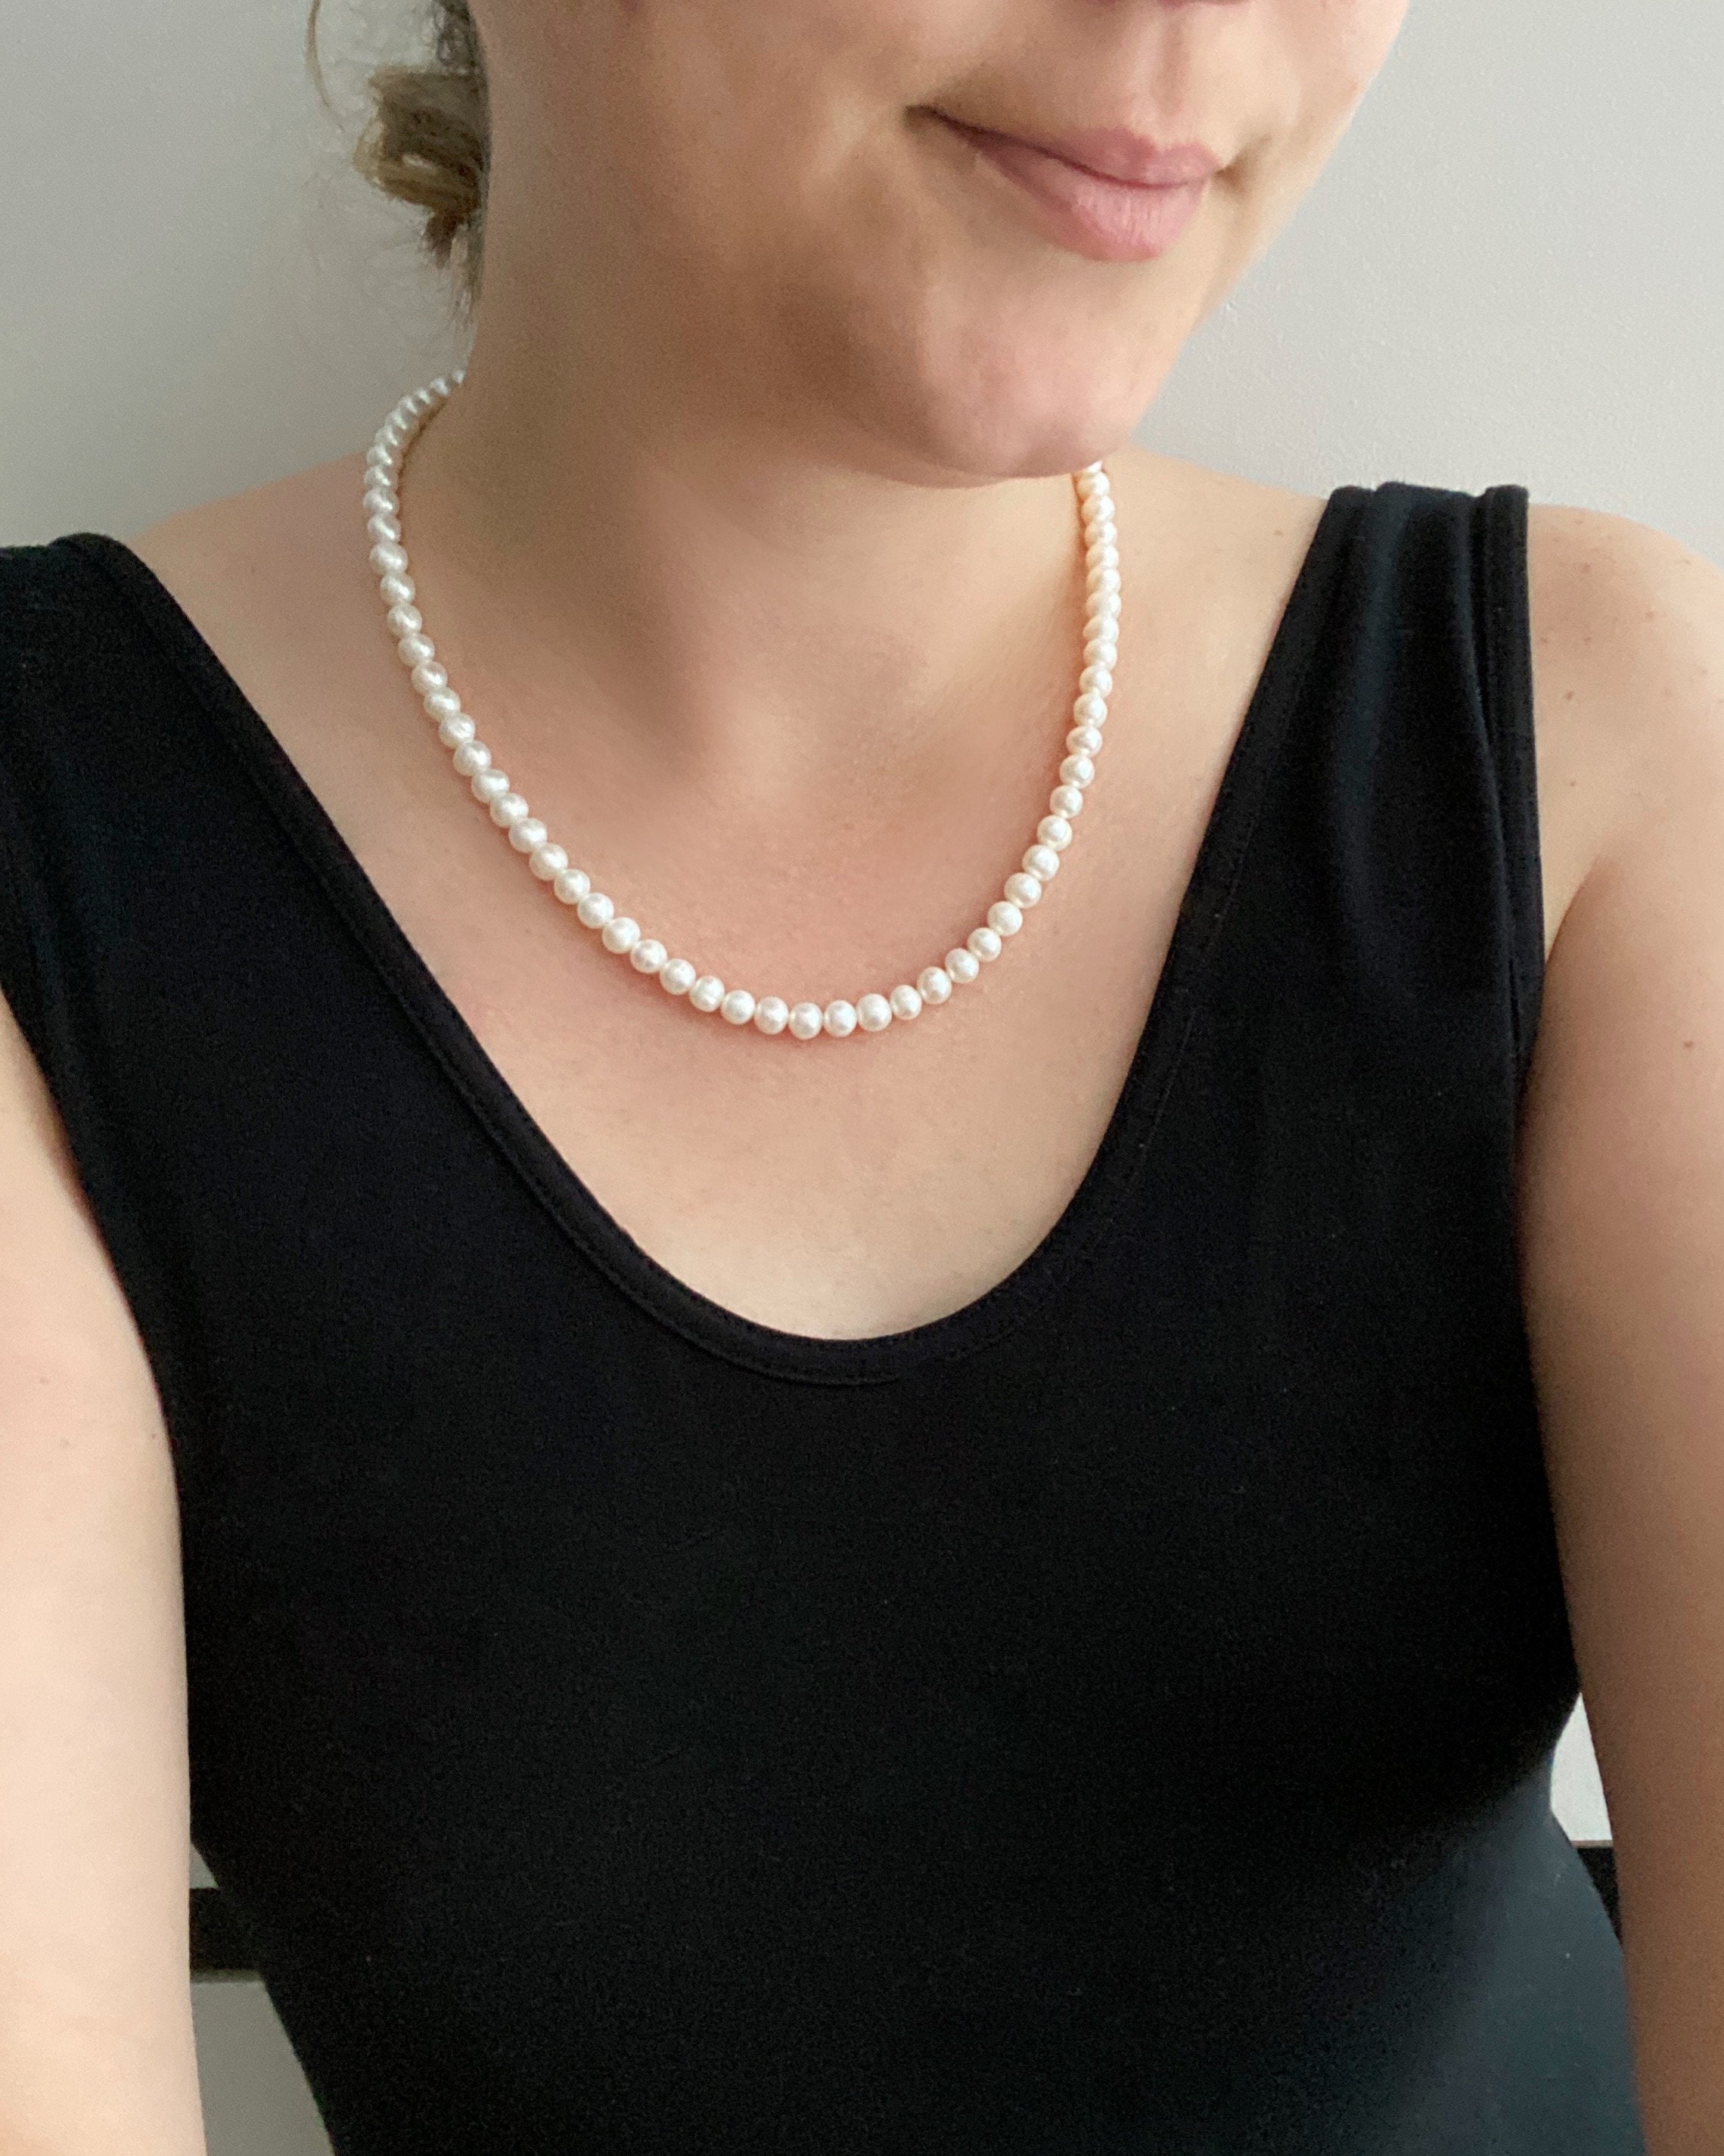 Carrie Bradshaw Pearl Beaded Necklace Just Like That Sex pic